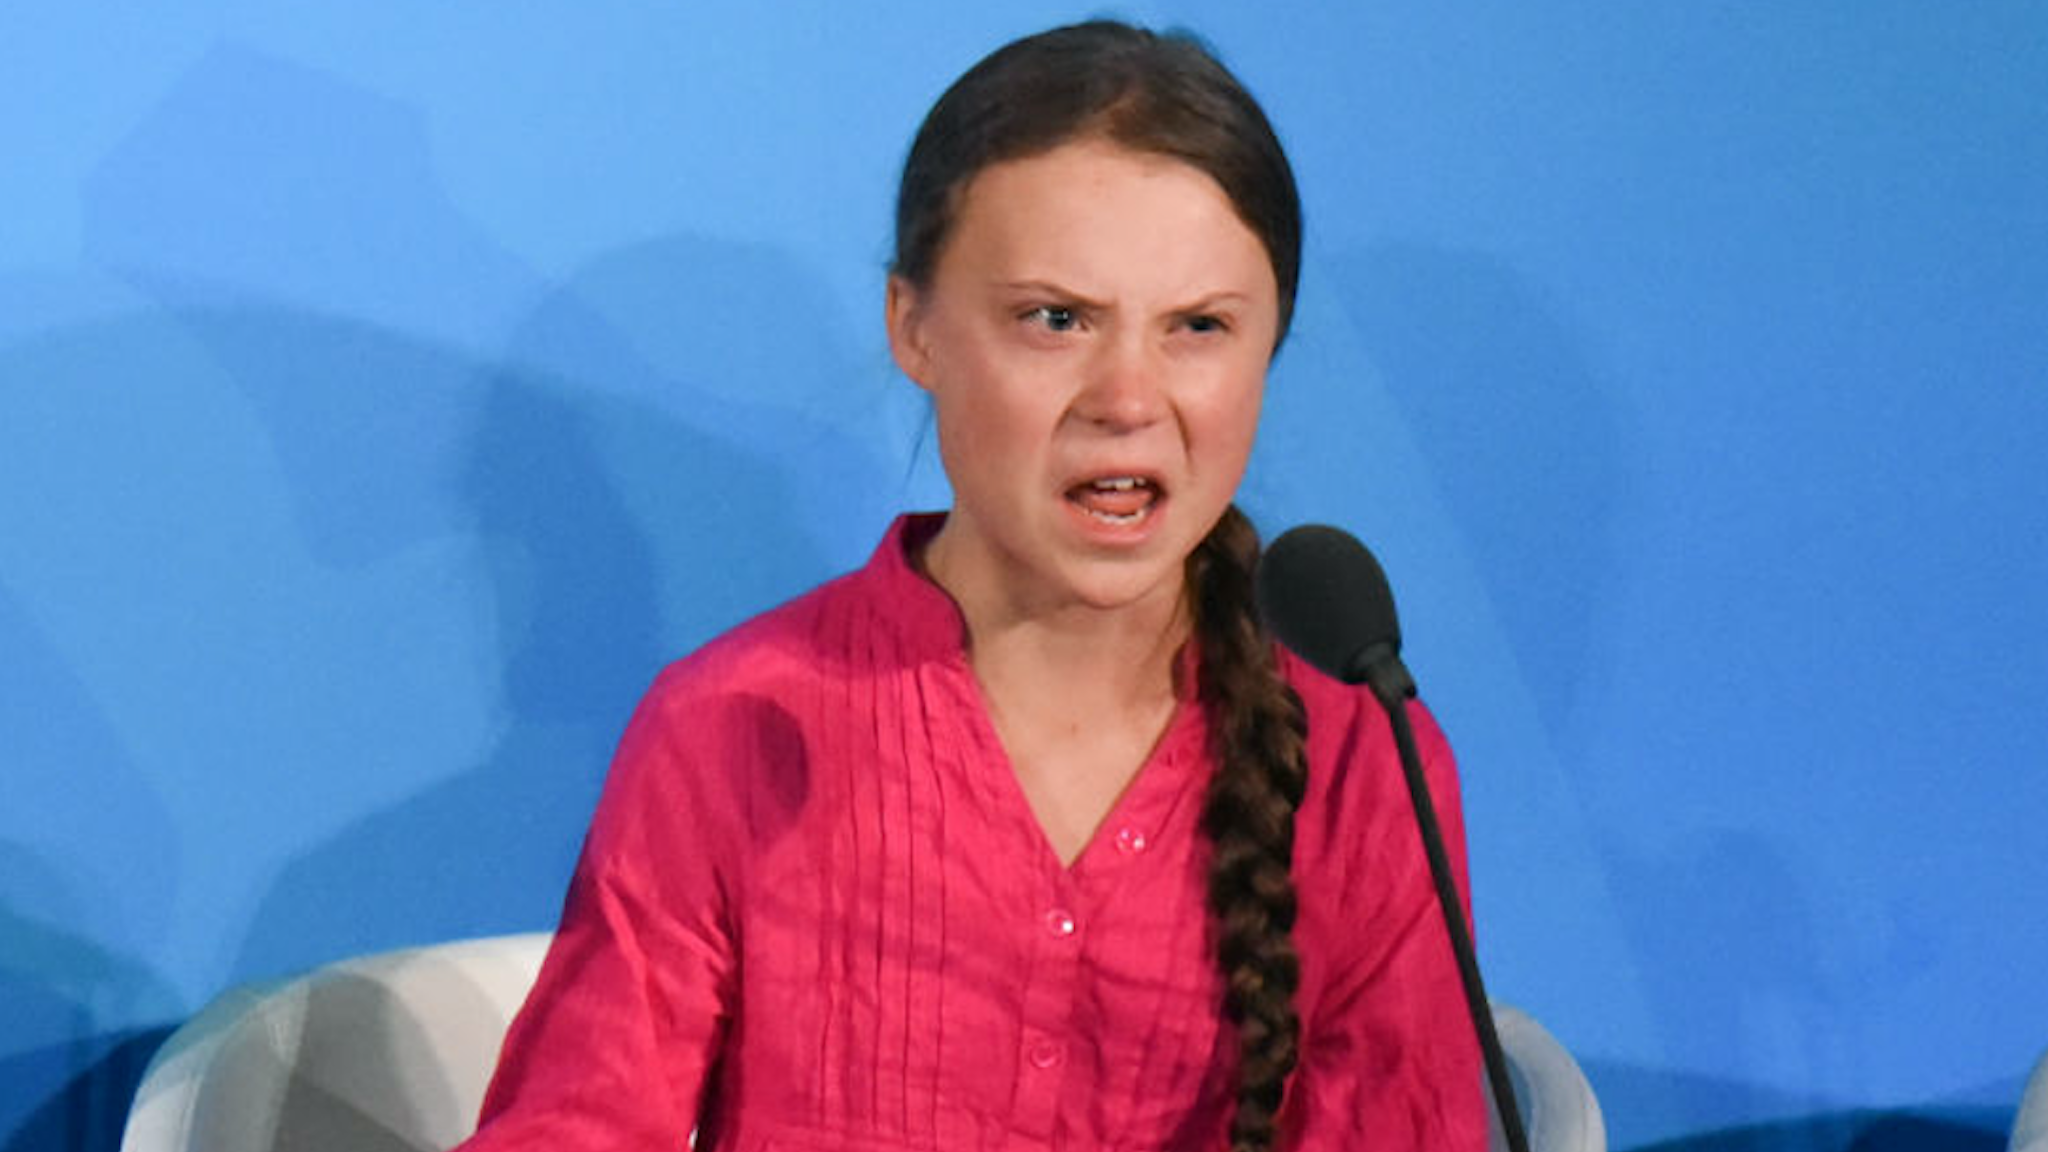 Youth activist Greta Thunberg speaks at the Climate Action Summit at the United Nations on September 23, 2019 in New York City.